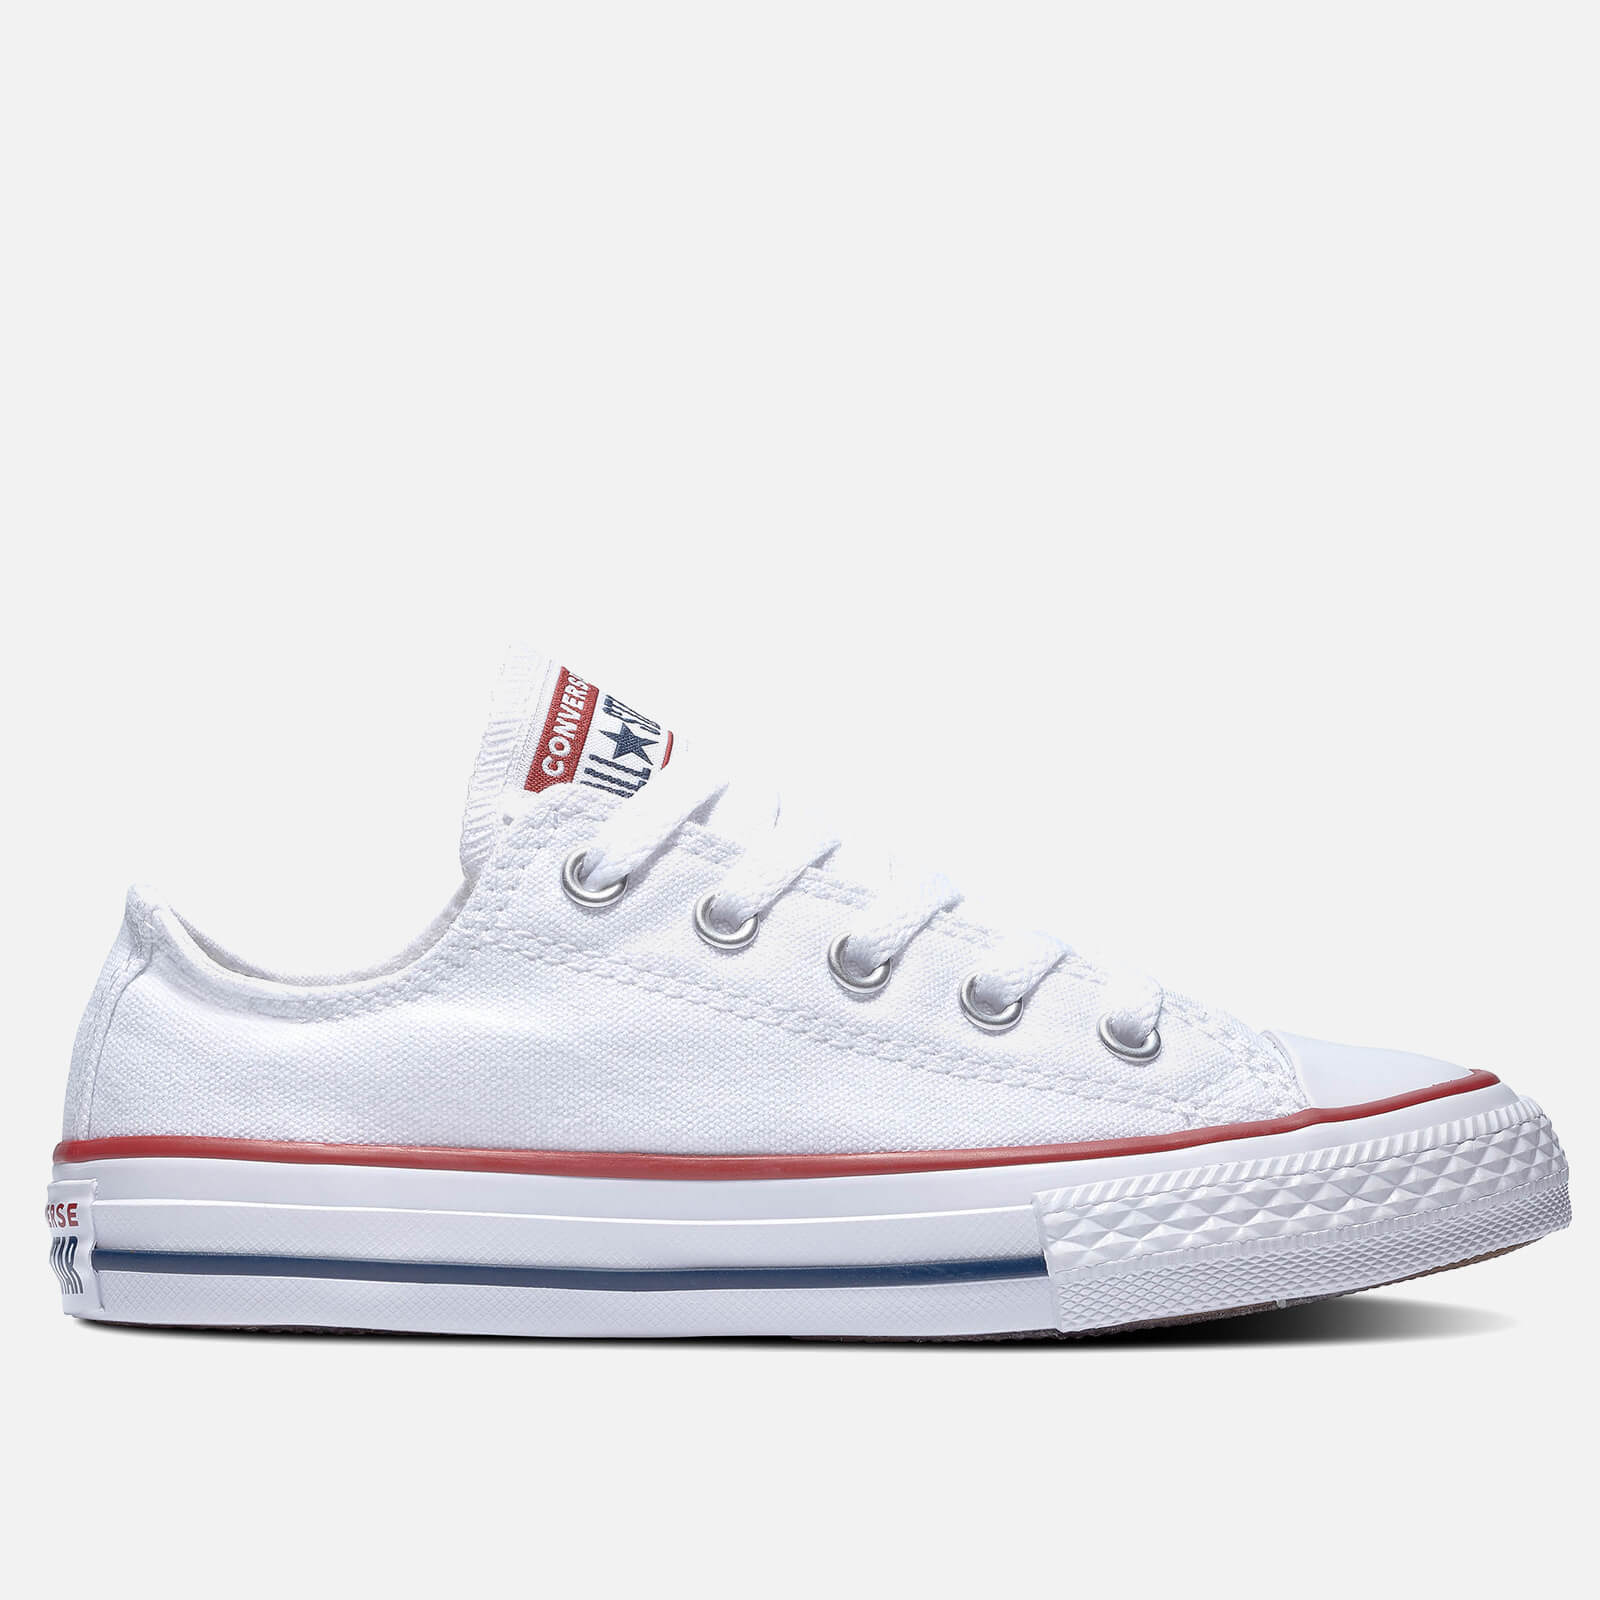 Converse Kids' Chuck Taylor All Star Ox Trainers - White - UK 12 Kids